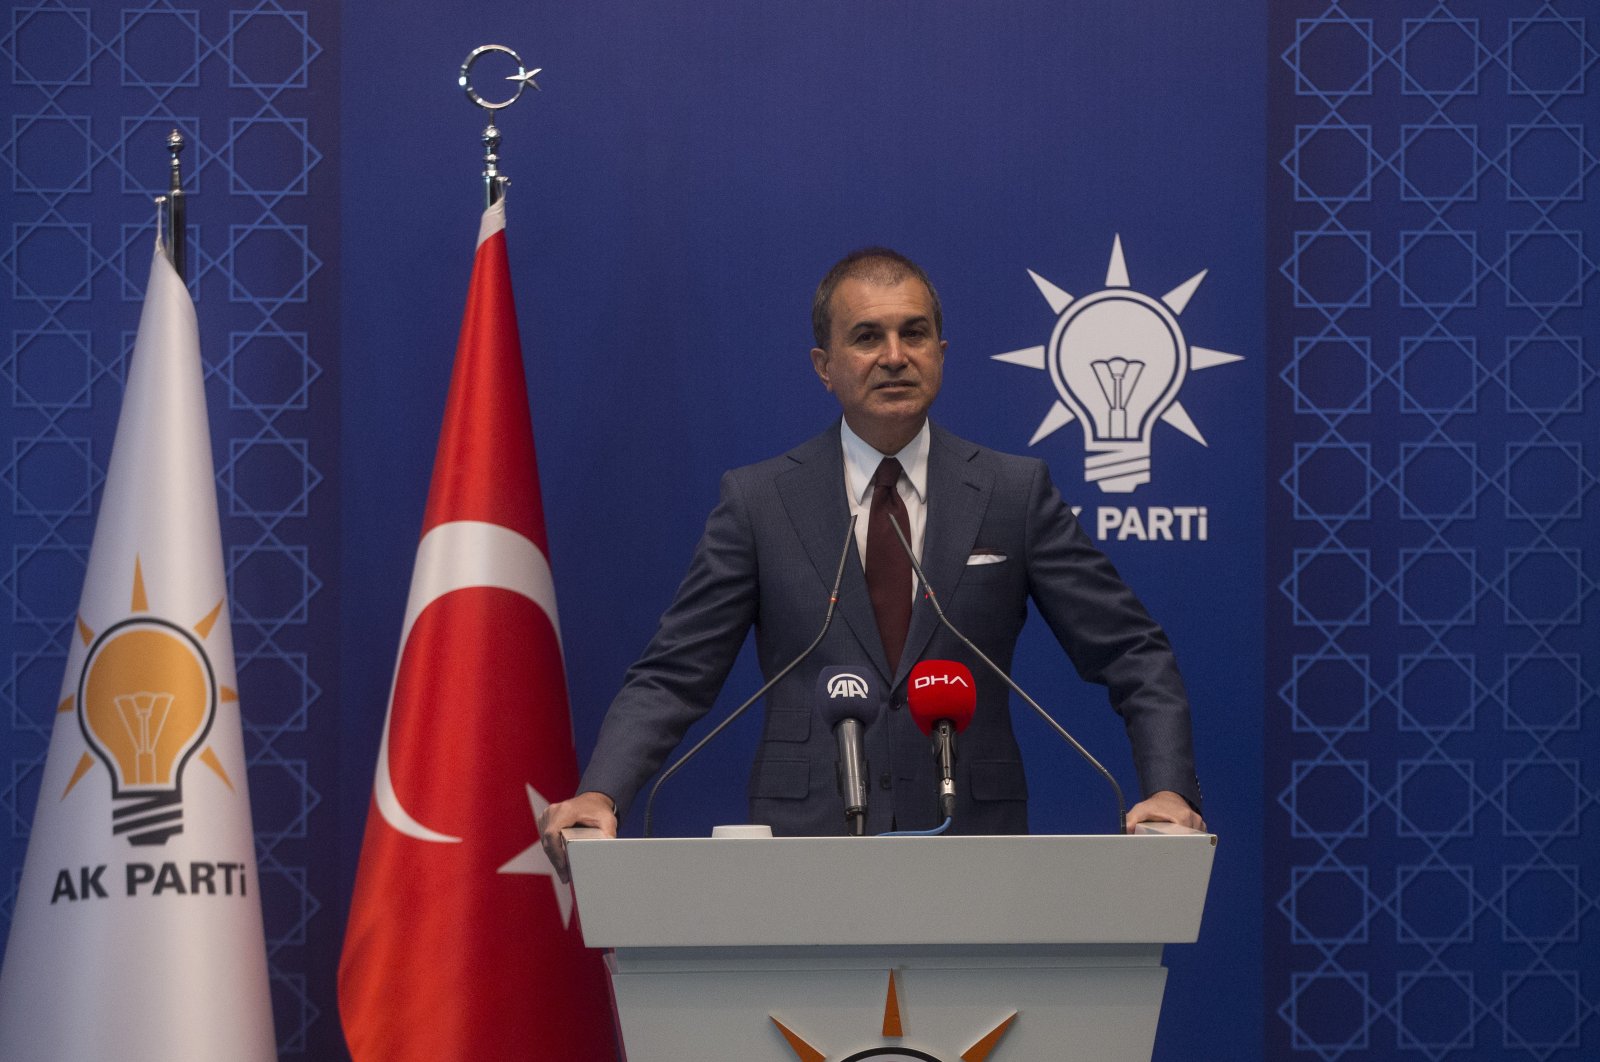 Ömer Çelik, the spokesman for the ruling Justice and Development (AK) Party, speaks to reporters after a party board meeting, Ankara, June 30, 2020. (AA Photo)